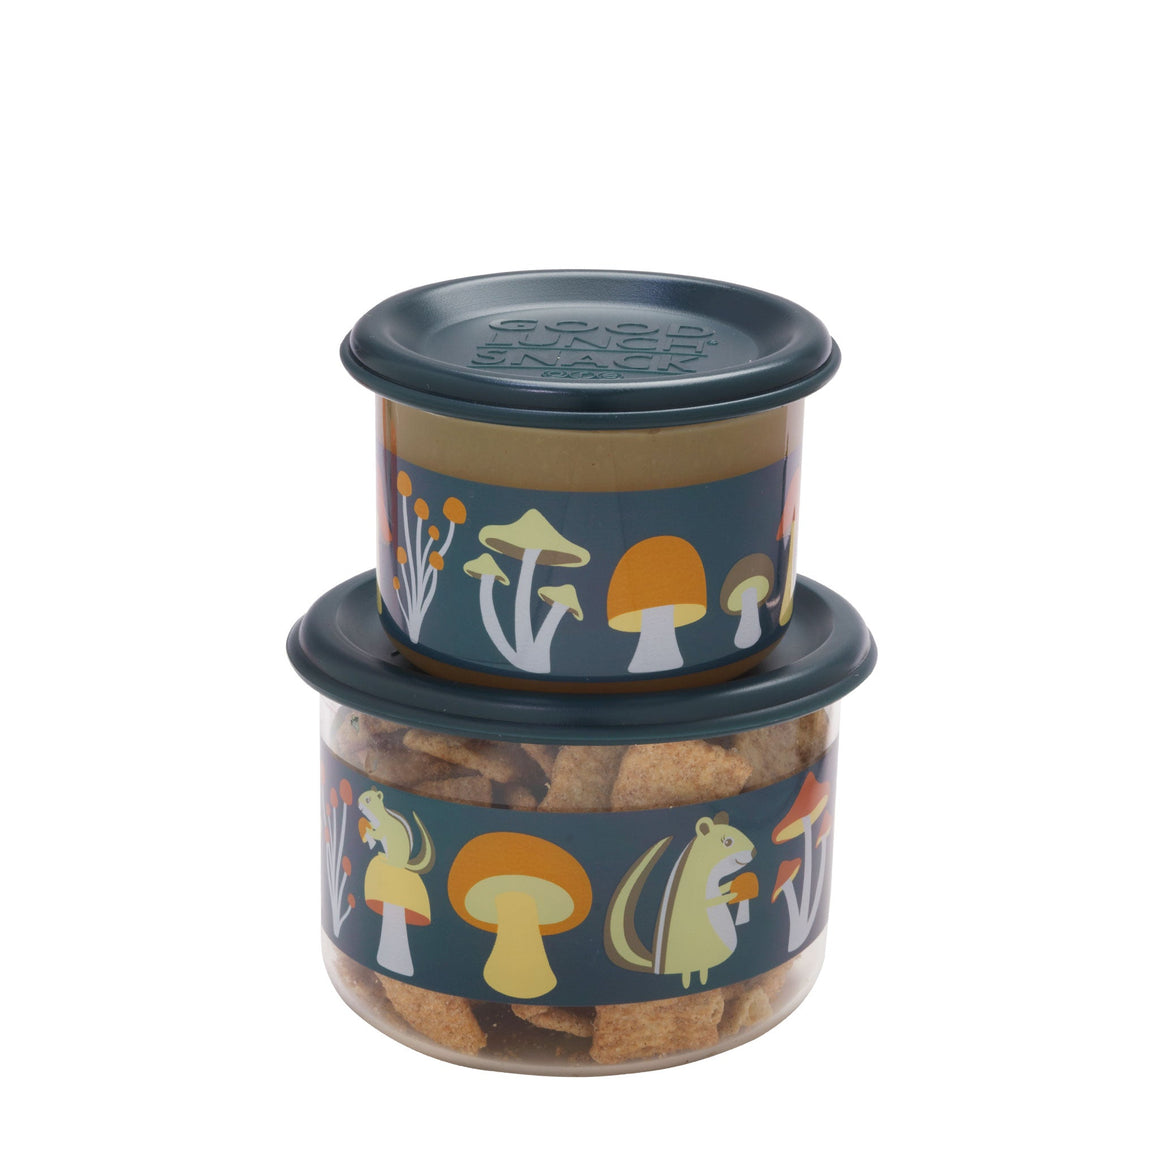 Mostly Mushrooms - Good Lunch Containers - Small 2 pcs.